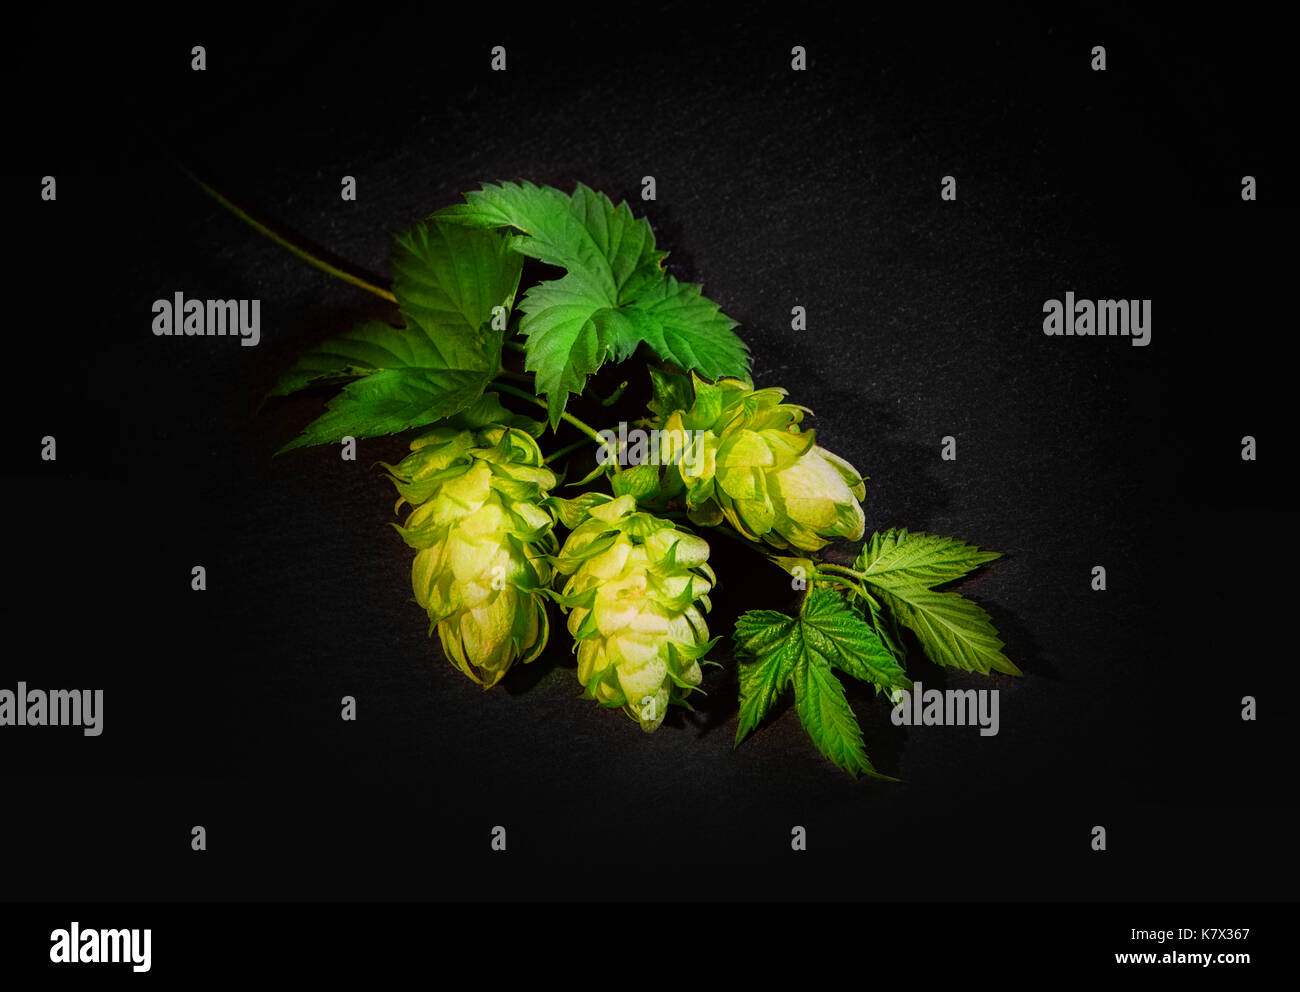 Young, fresh, green hops on a black background close-up. Stock Photo